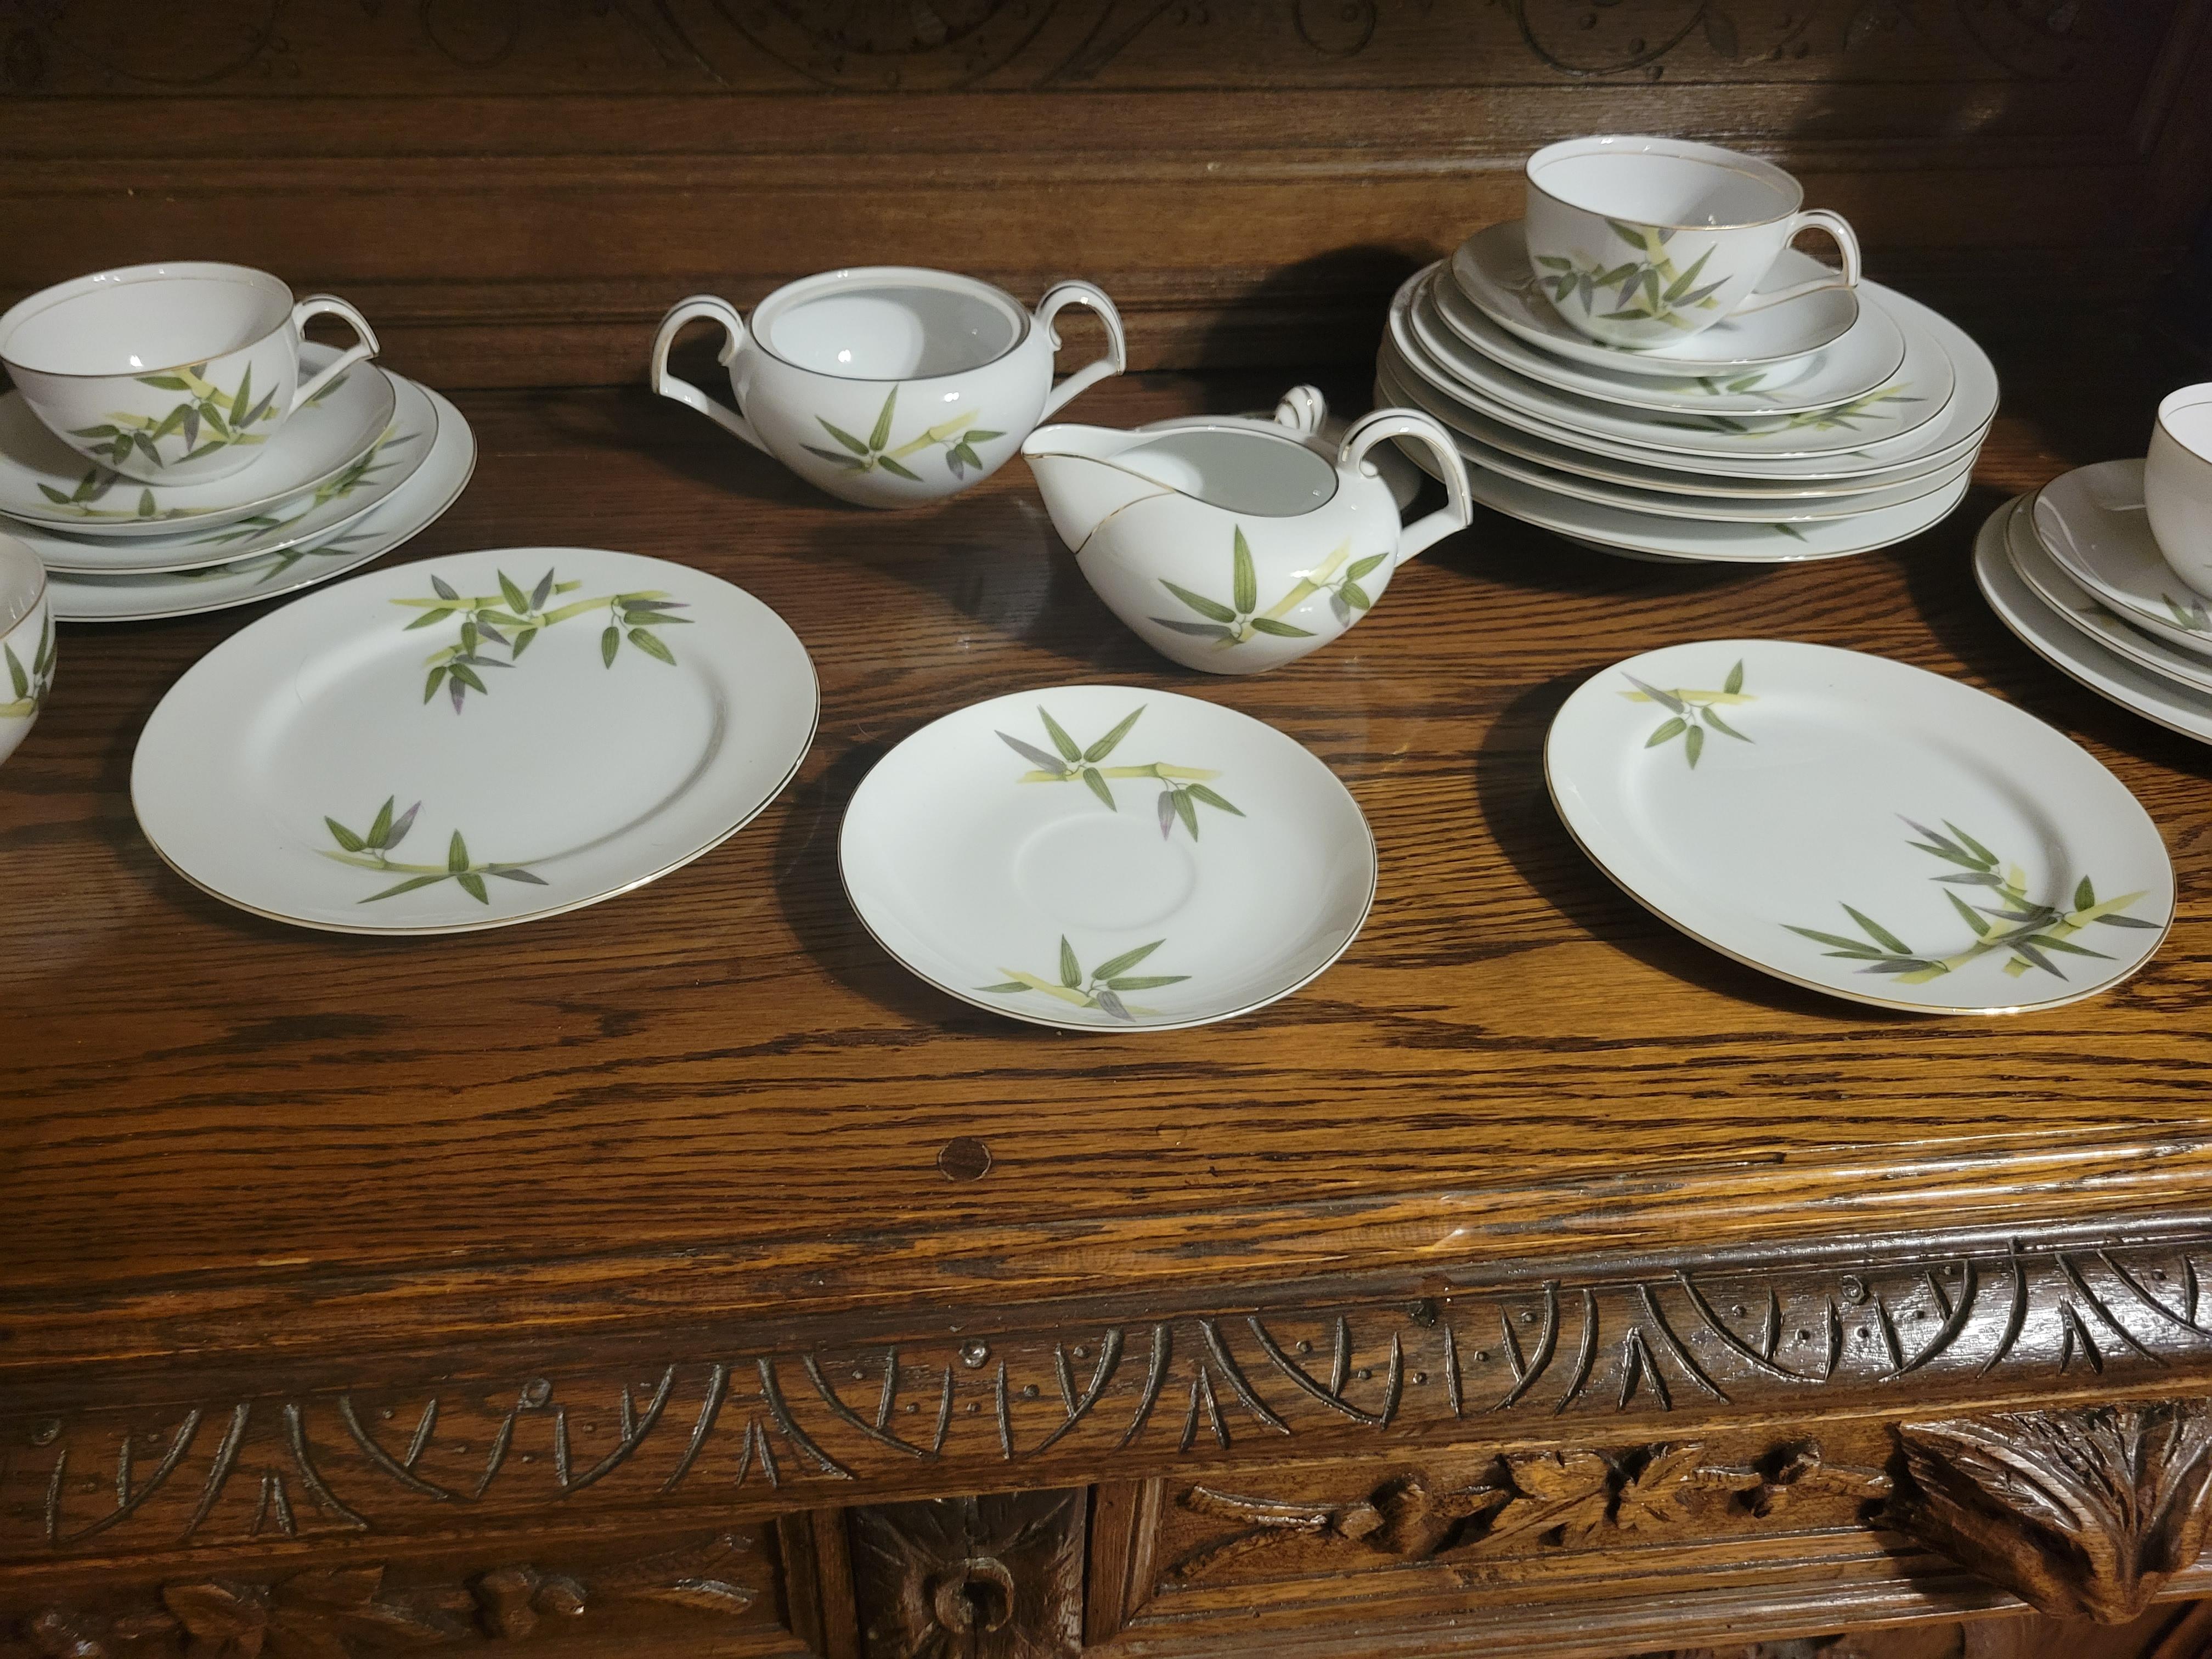 1951 Narumi Japan 'Spring Bamboo' Fine China Set - 24 pieces plus replacements  For Sale 4